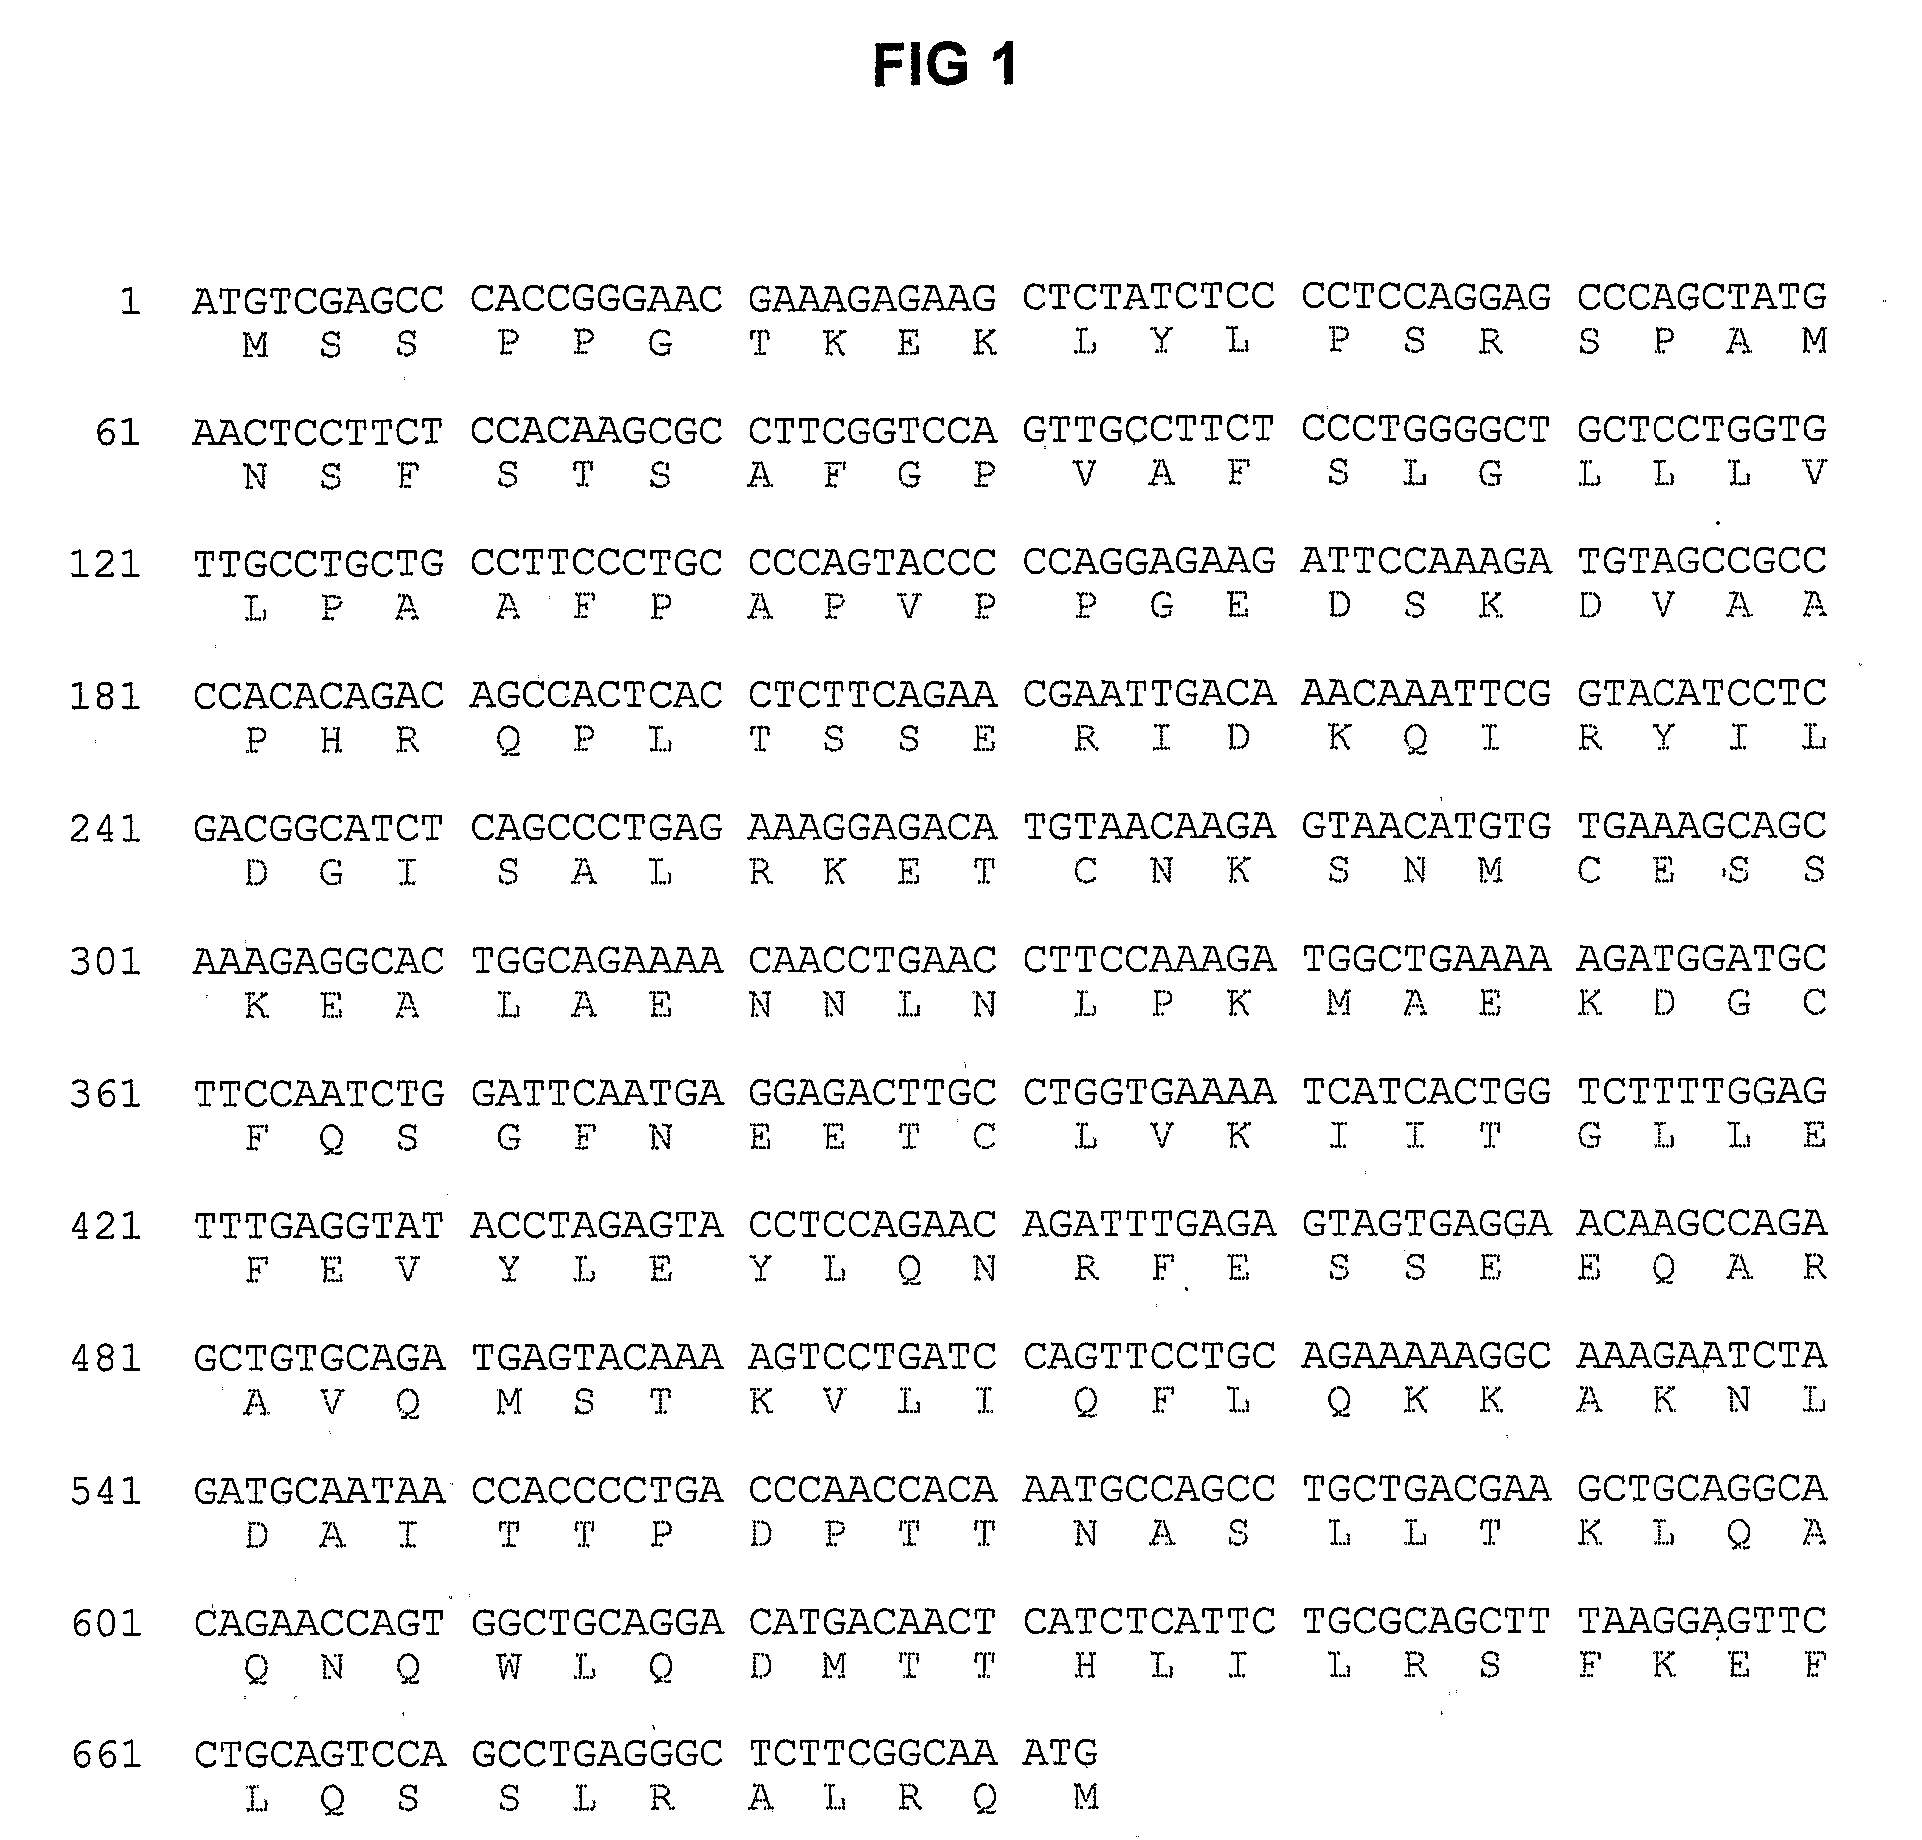 Capsules Containing Transiently Transfected Cells, Method for Preparing Same and Uses Thereof